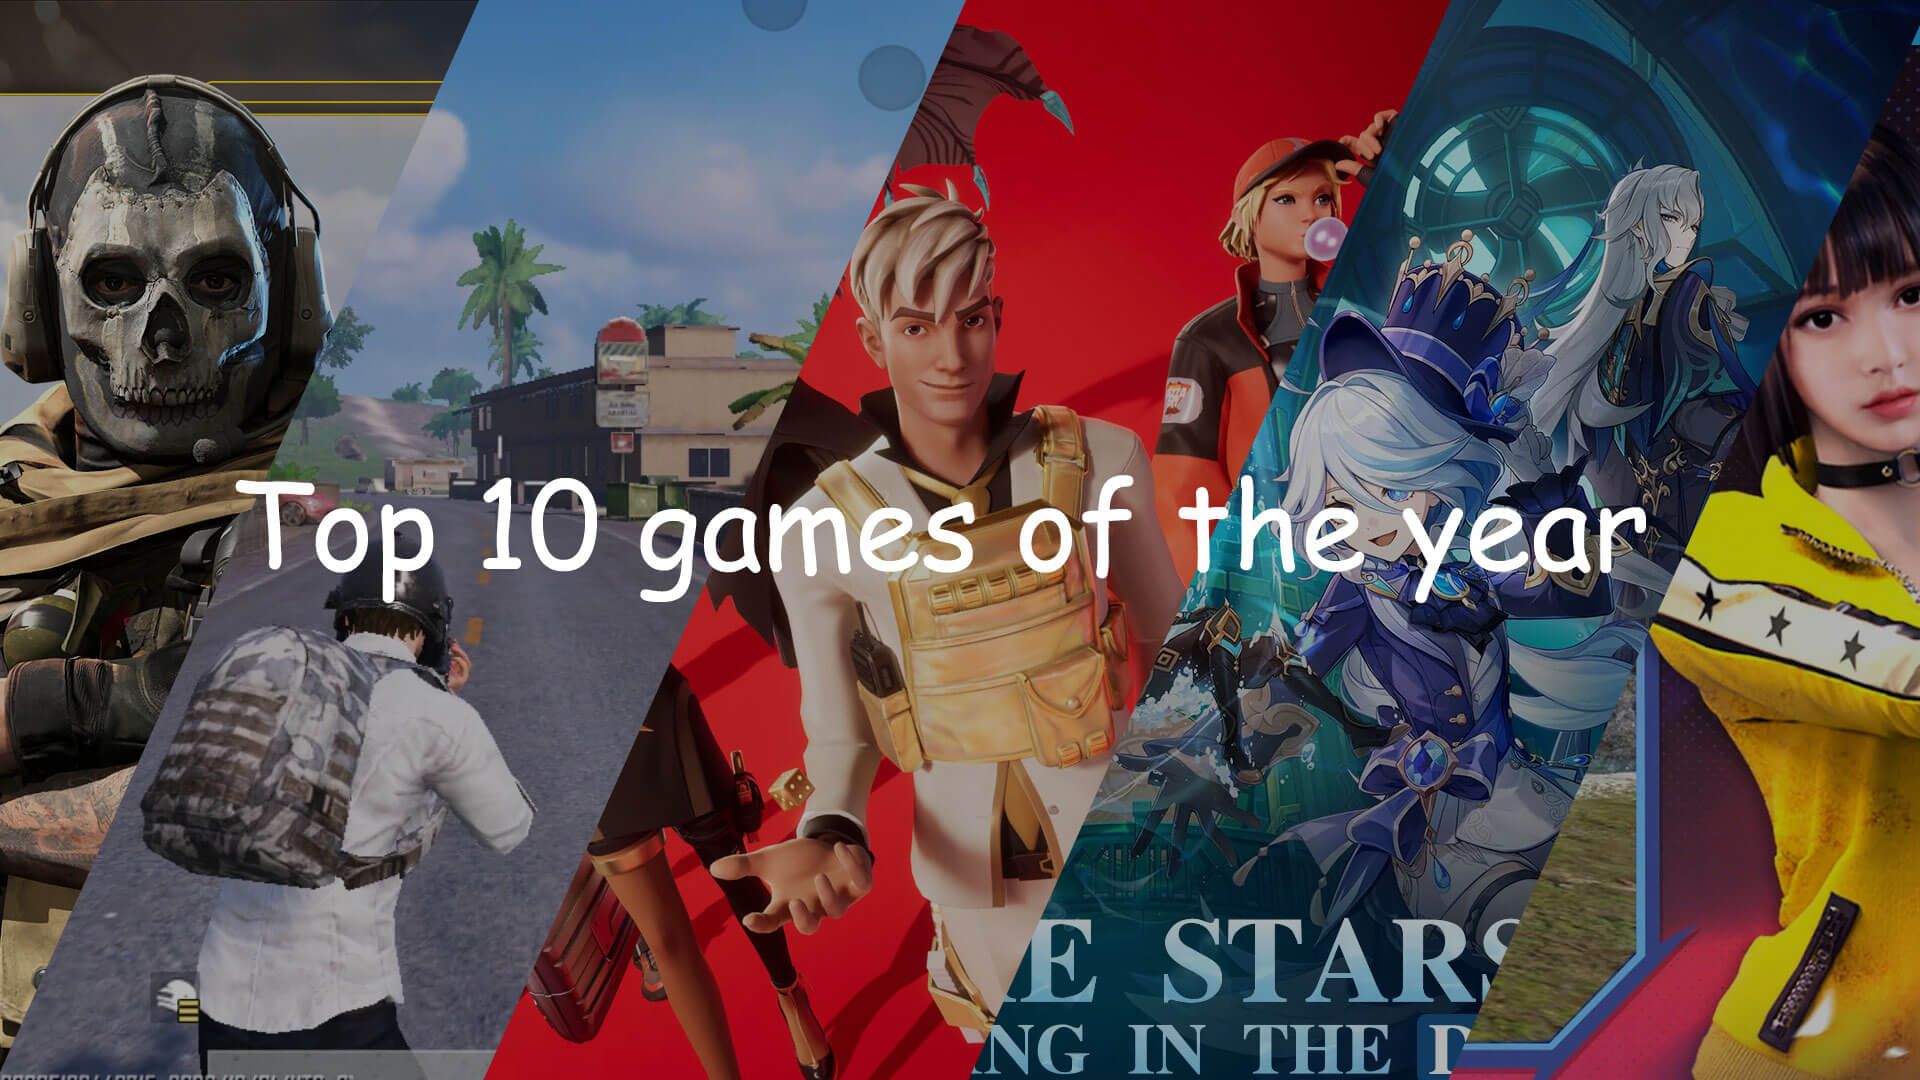 Top 10 Best Mobile Games of the Year — 2023